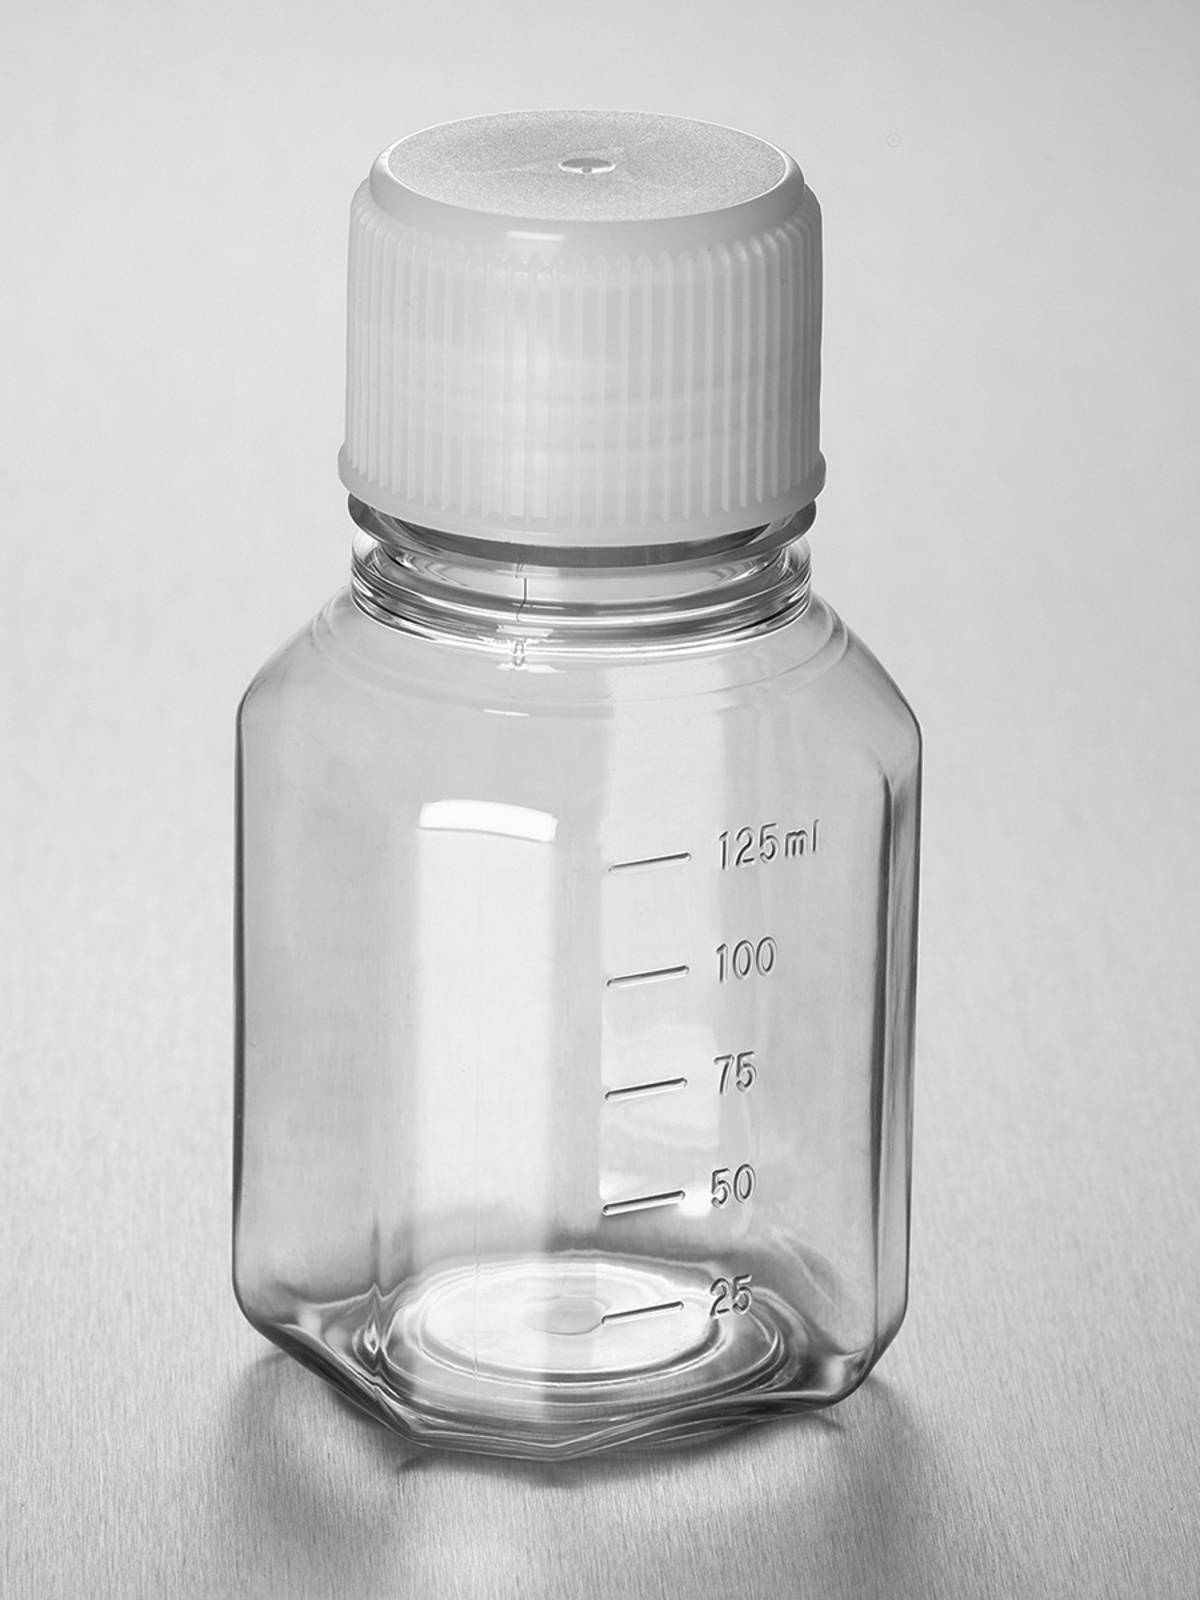 https://www.corning.com/catalog/cls/products/c/corningPETBottles/432231/images/432331_A.jpg/_jcr_content/renditions/product.zoom.1200.jpg